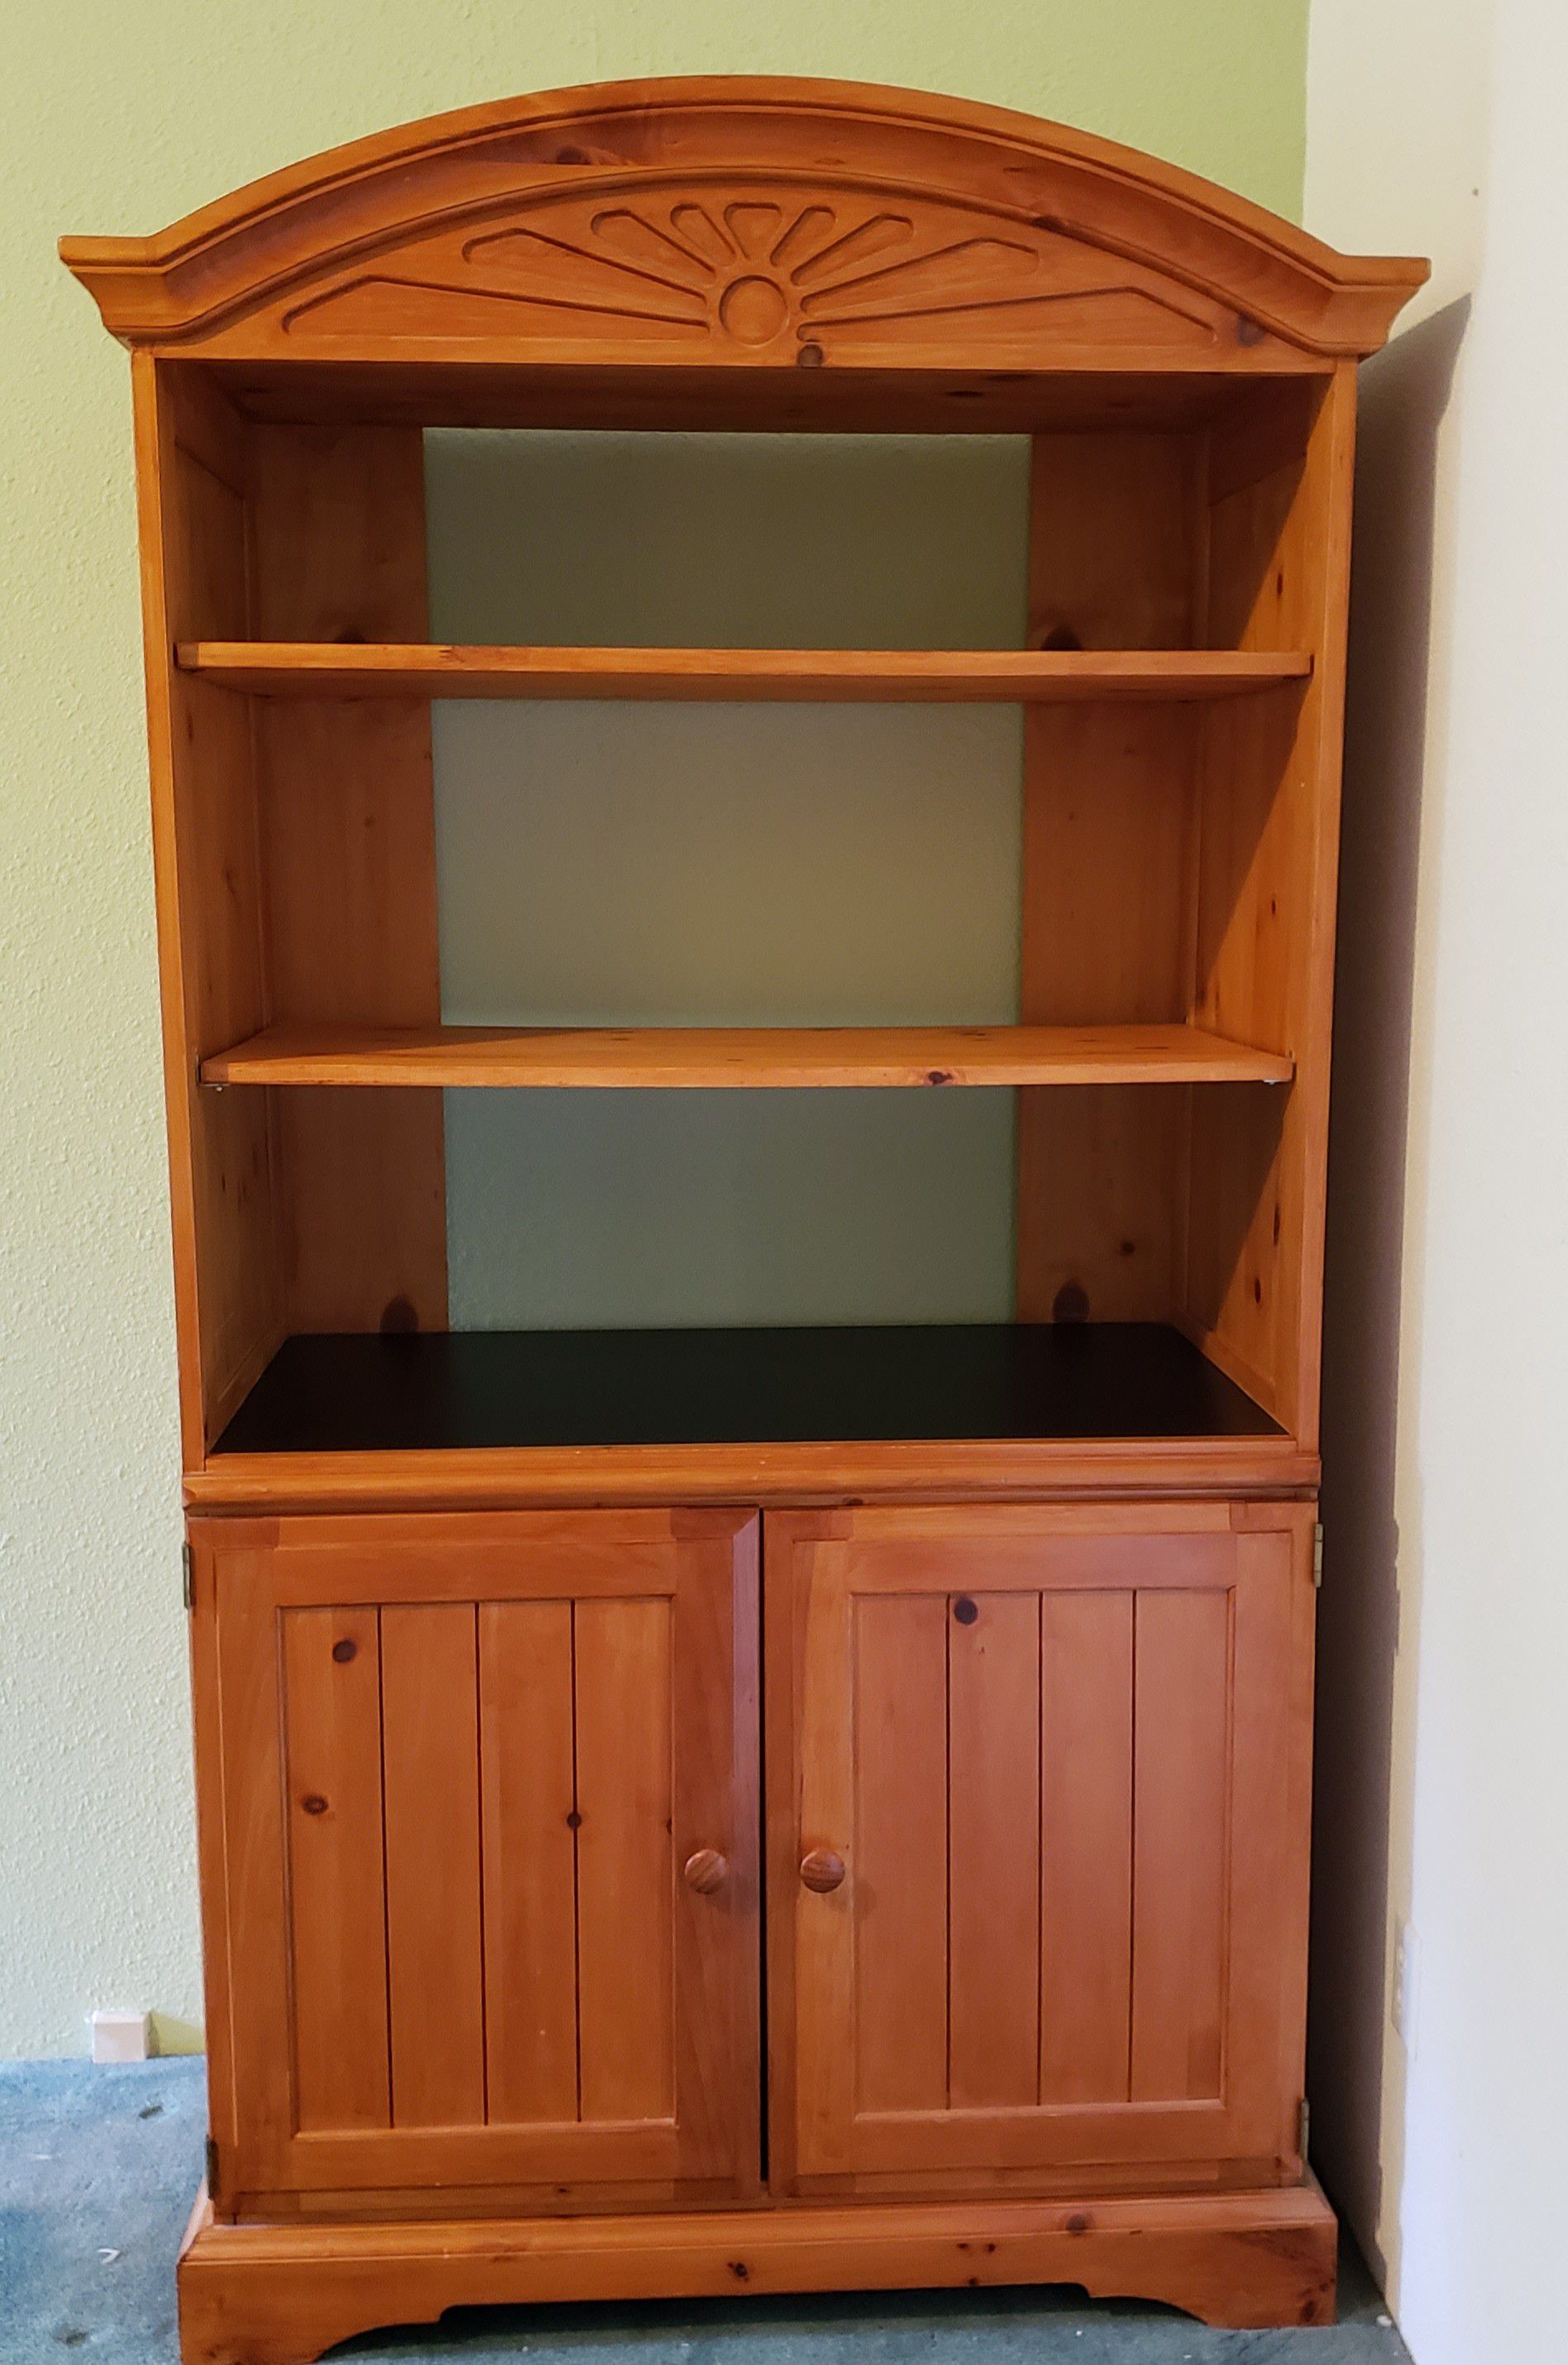 Solid wood cabinet with shelvesun